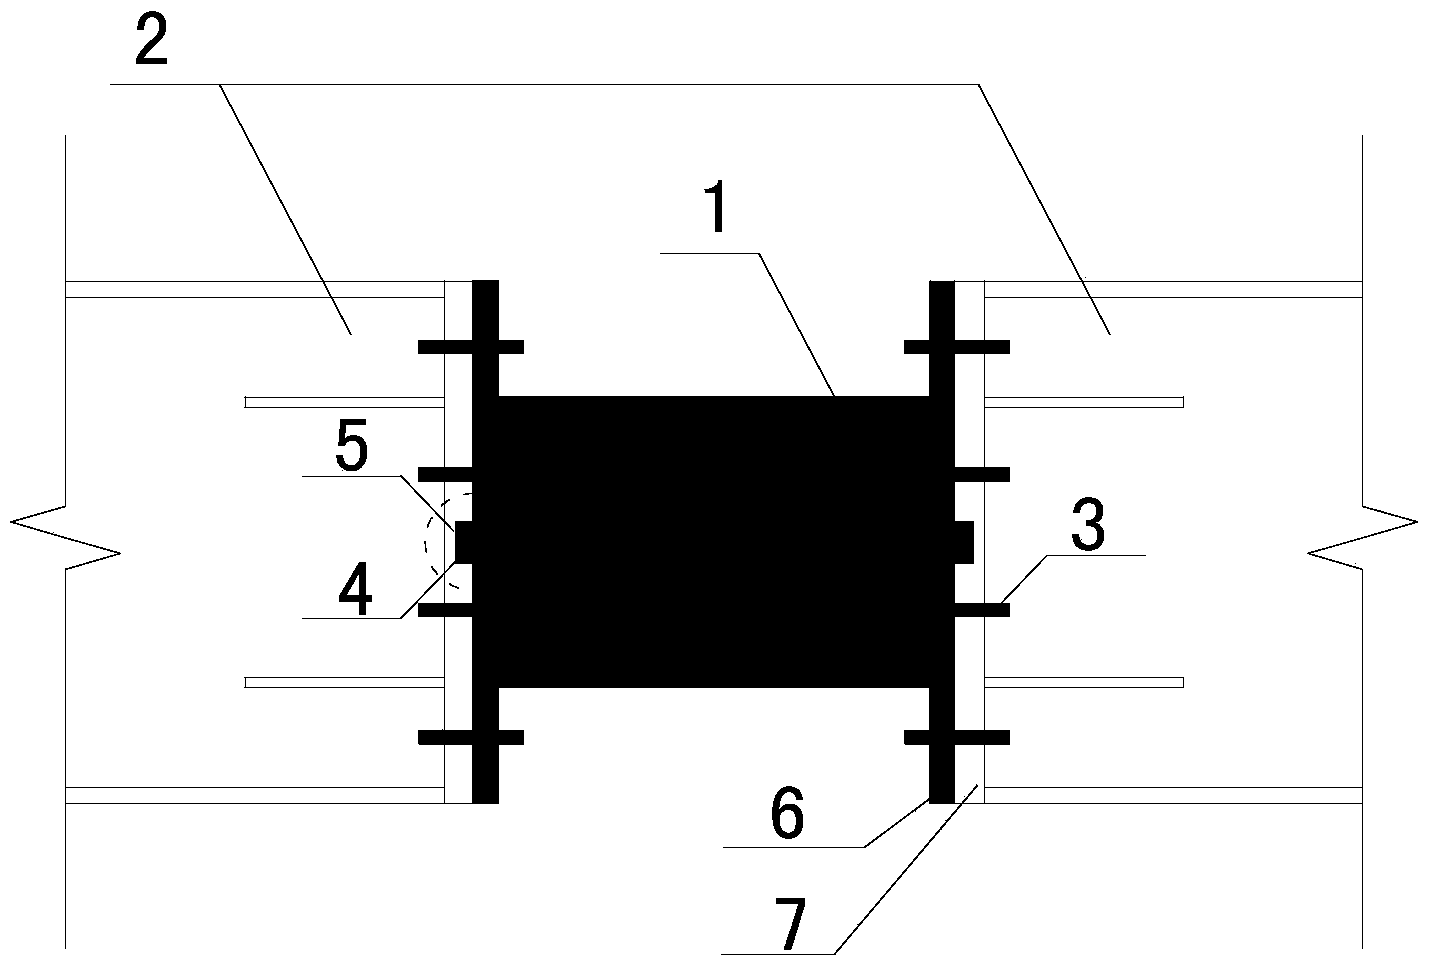 Novel connecting structure capable of achieving replacement of steel coupling beams